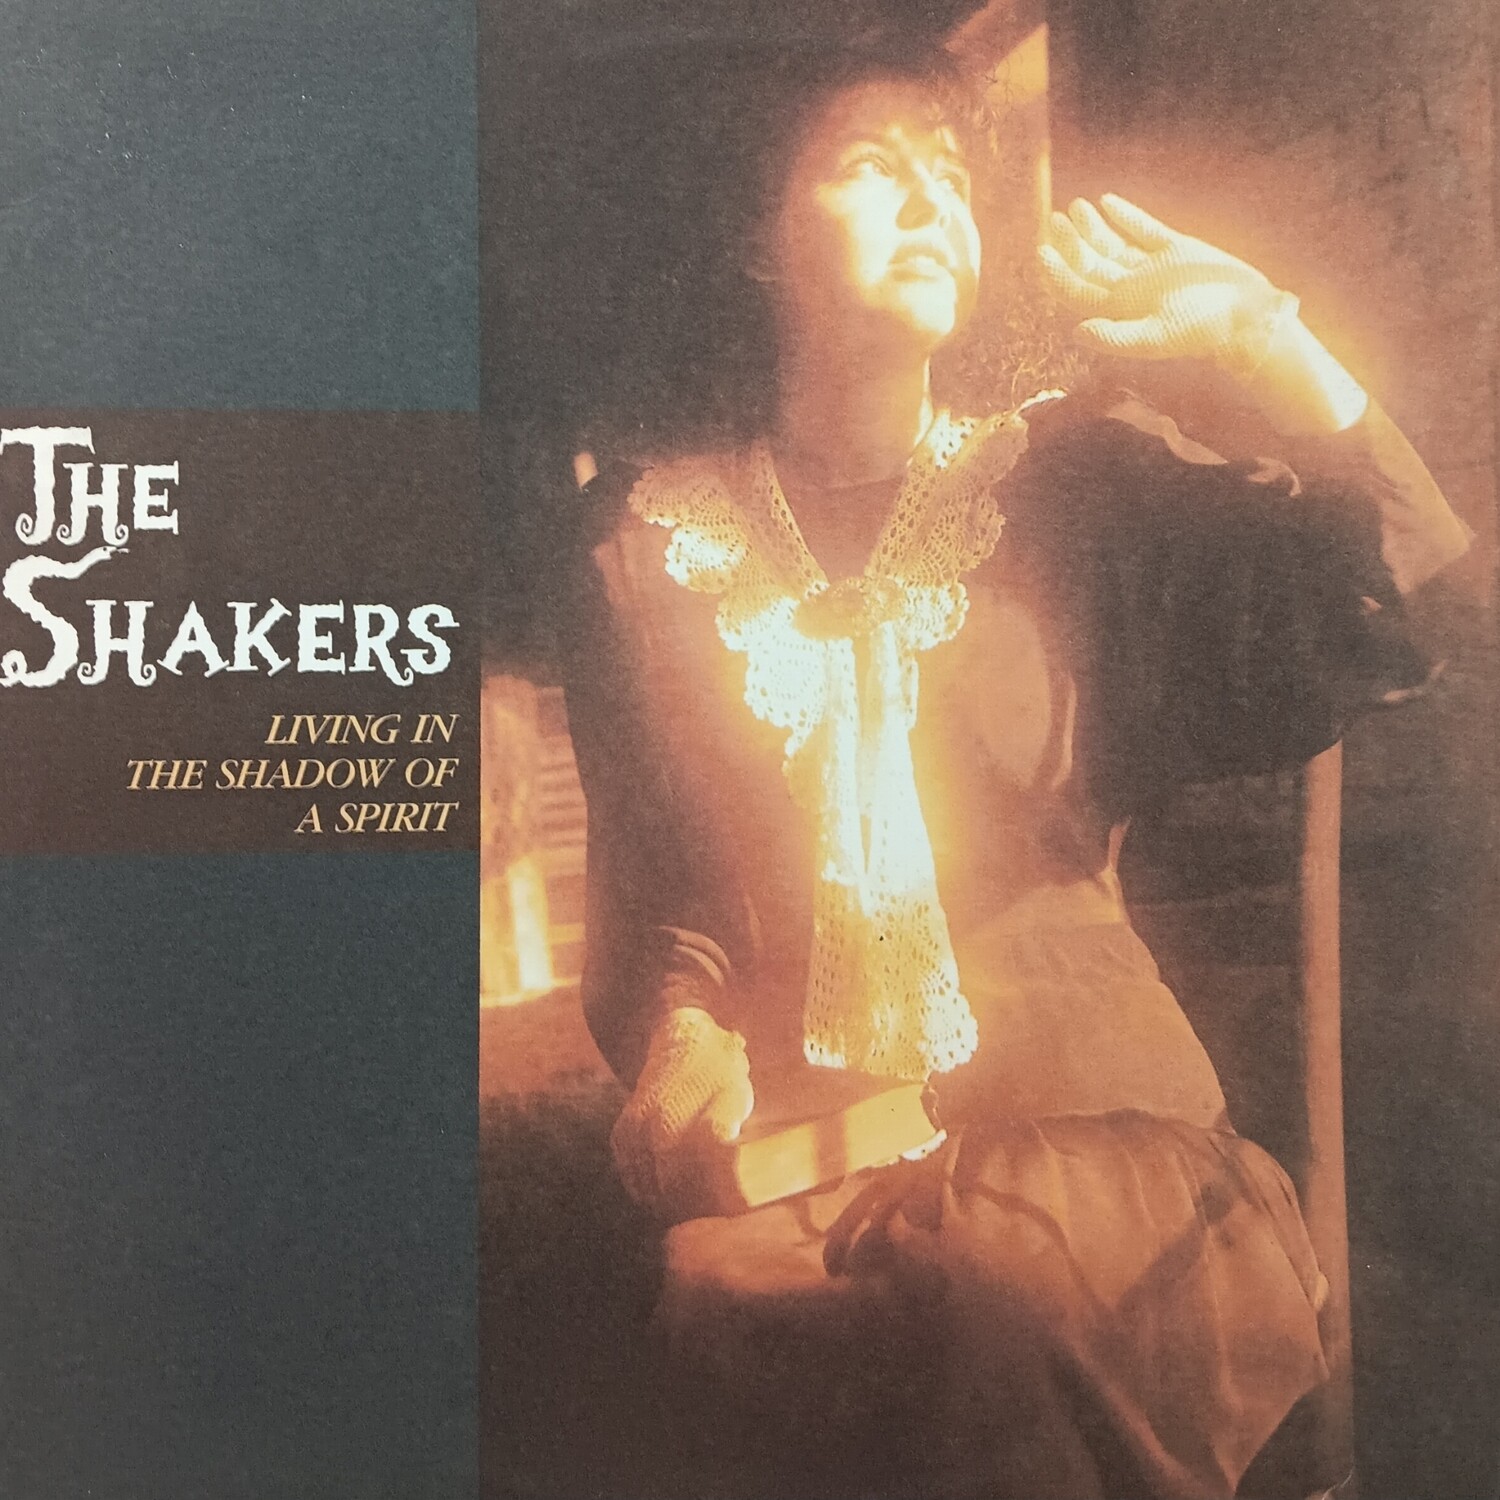 THE SHAKERS - Living in the shadow of a spirit